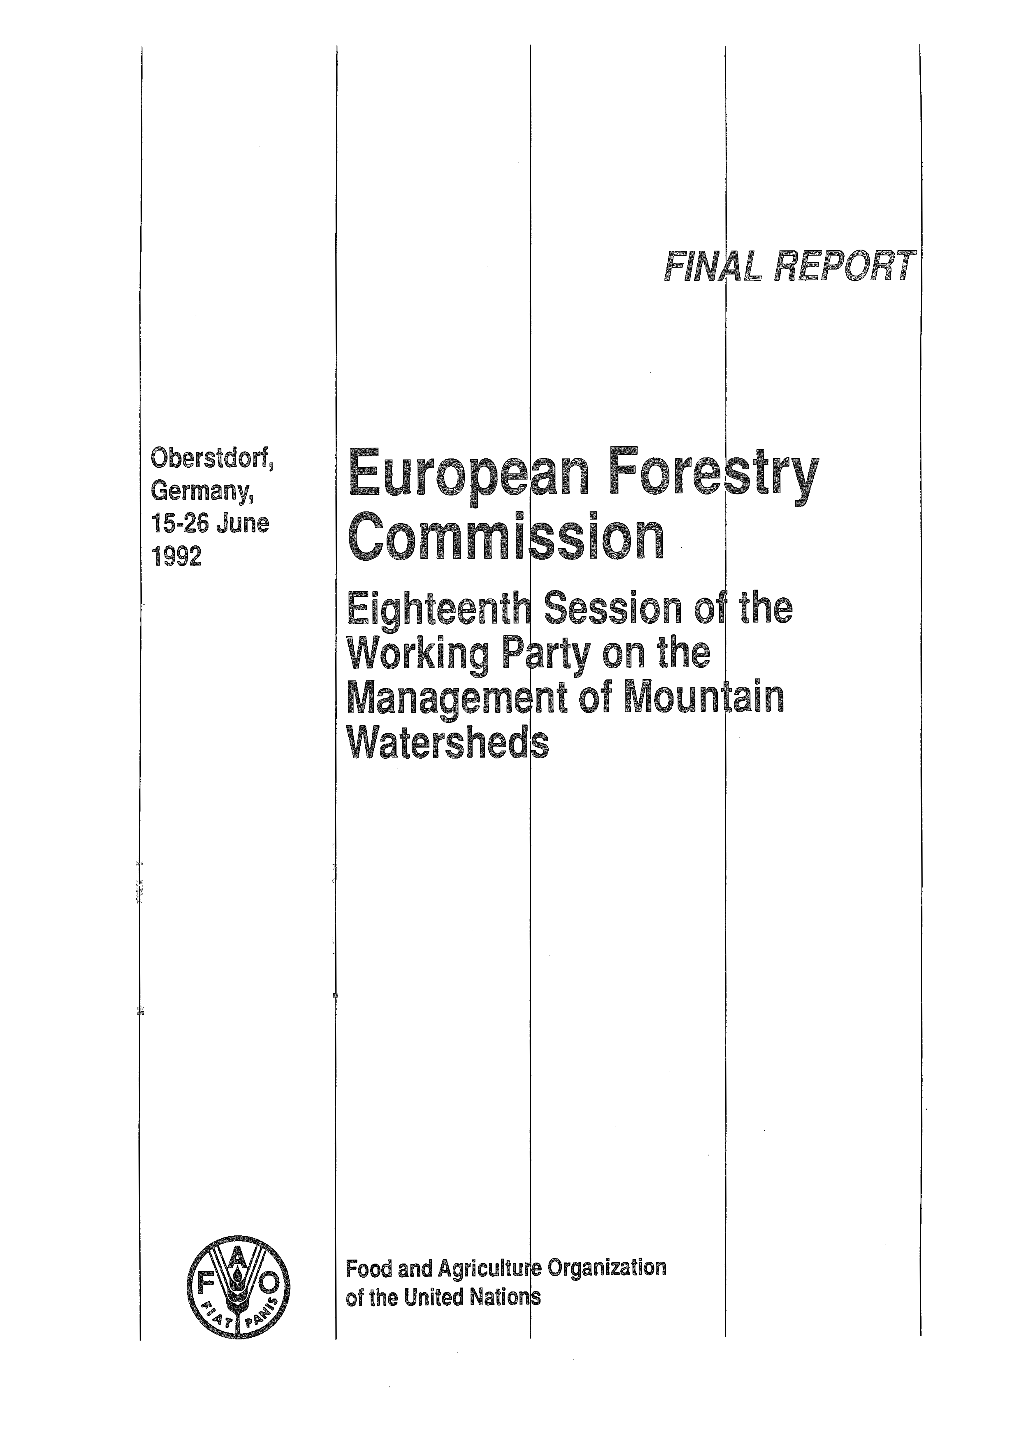 Food and Agricultu Organization of the United Nation EUROPEAN FORESTRY COMMISSION